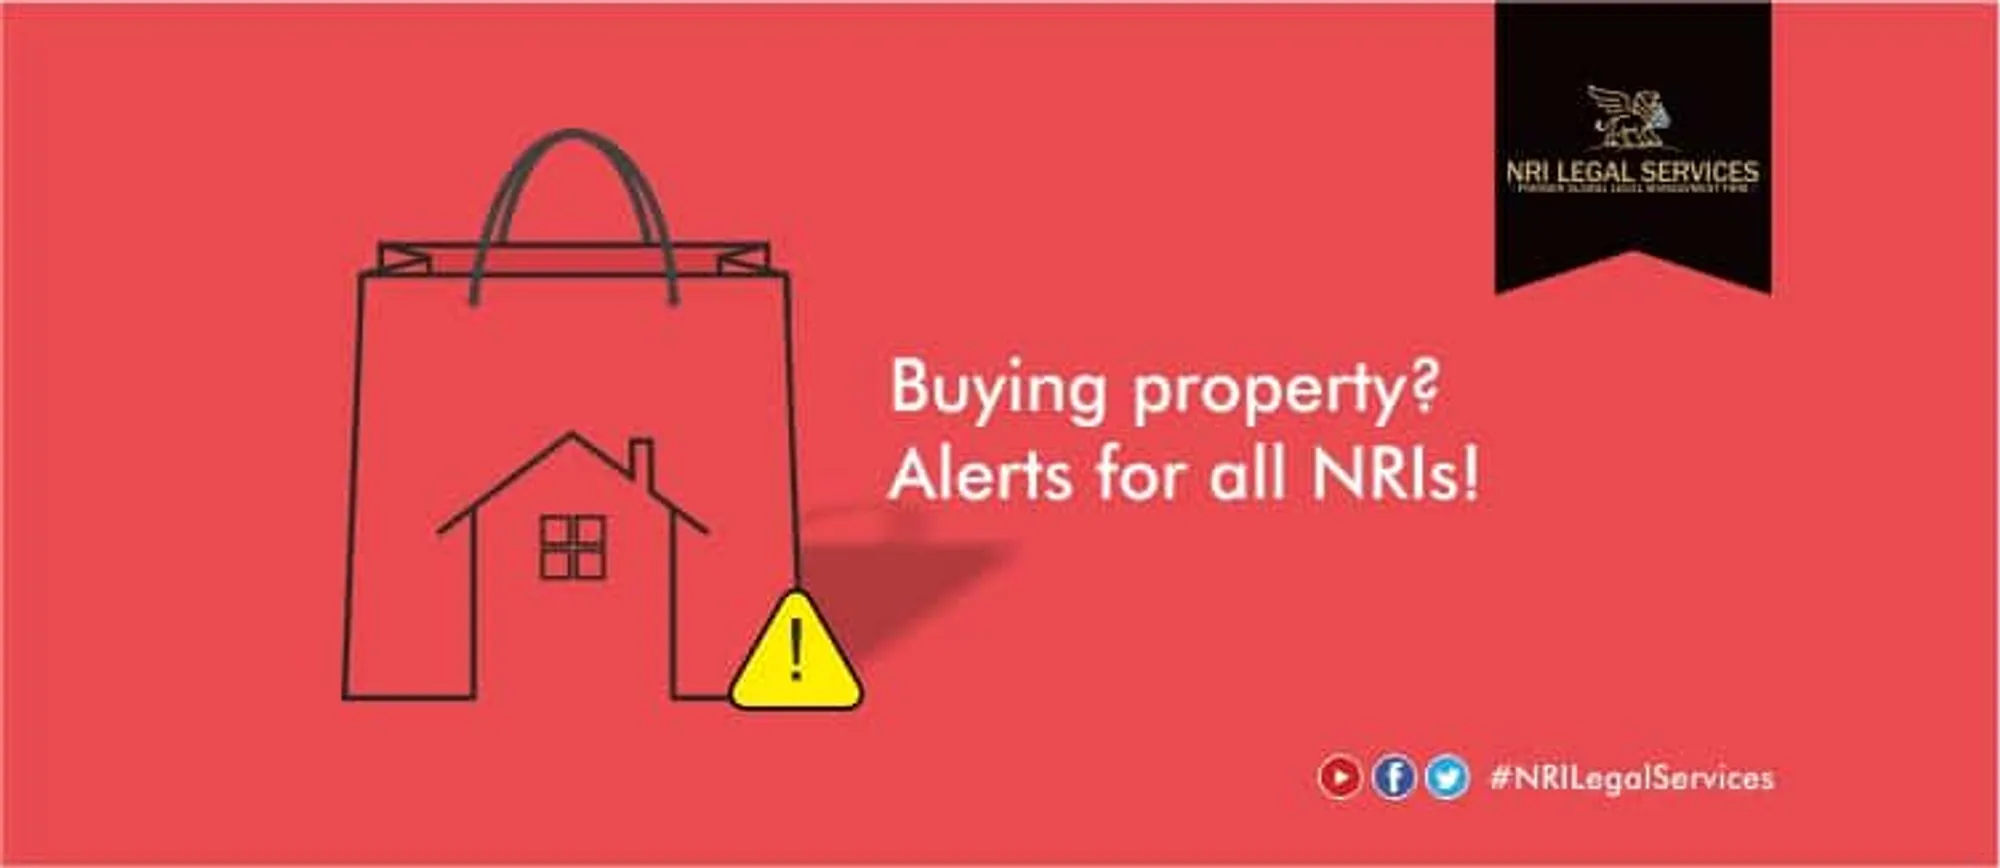 NRIs-Alert-Buying-property-in-India-The-guidelines-1